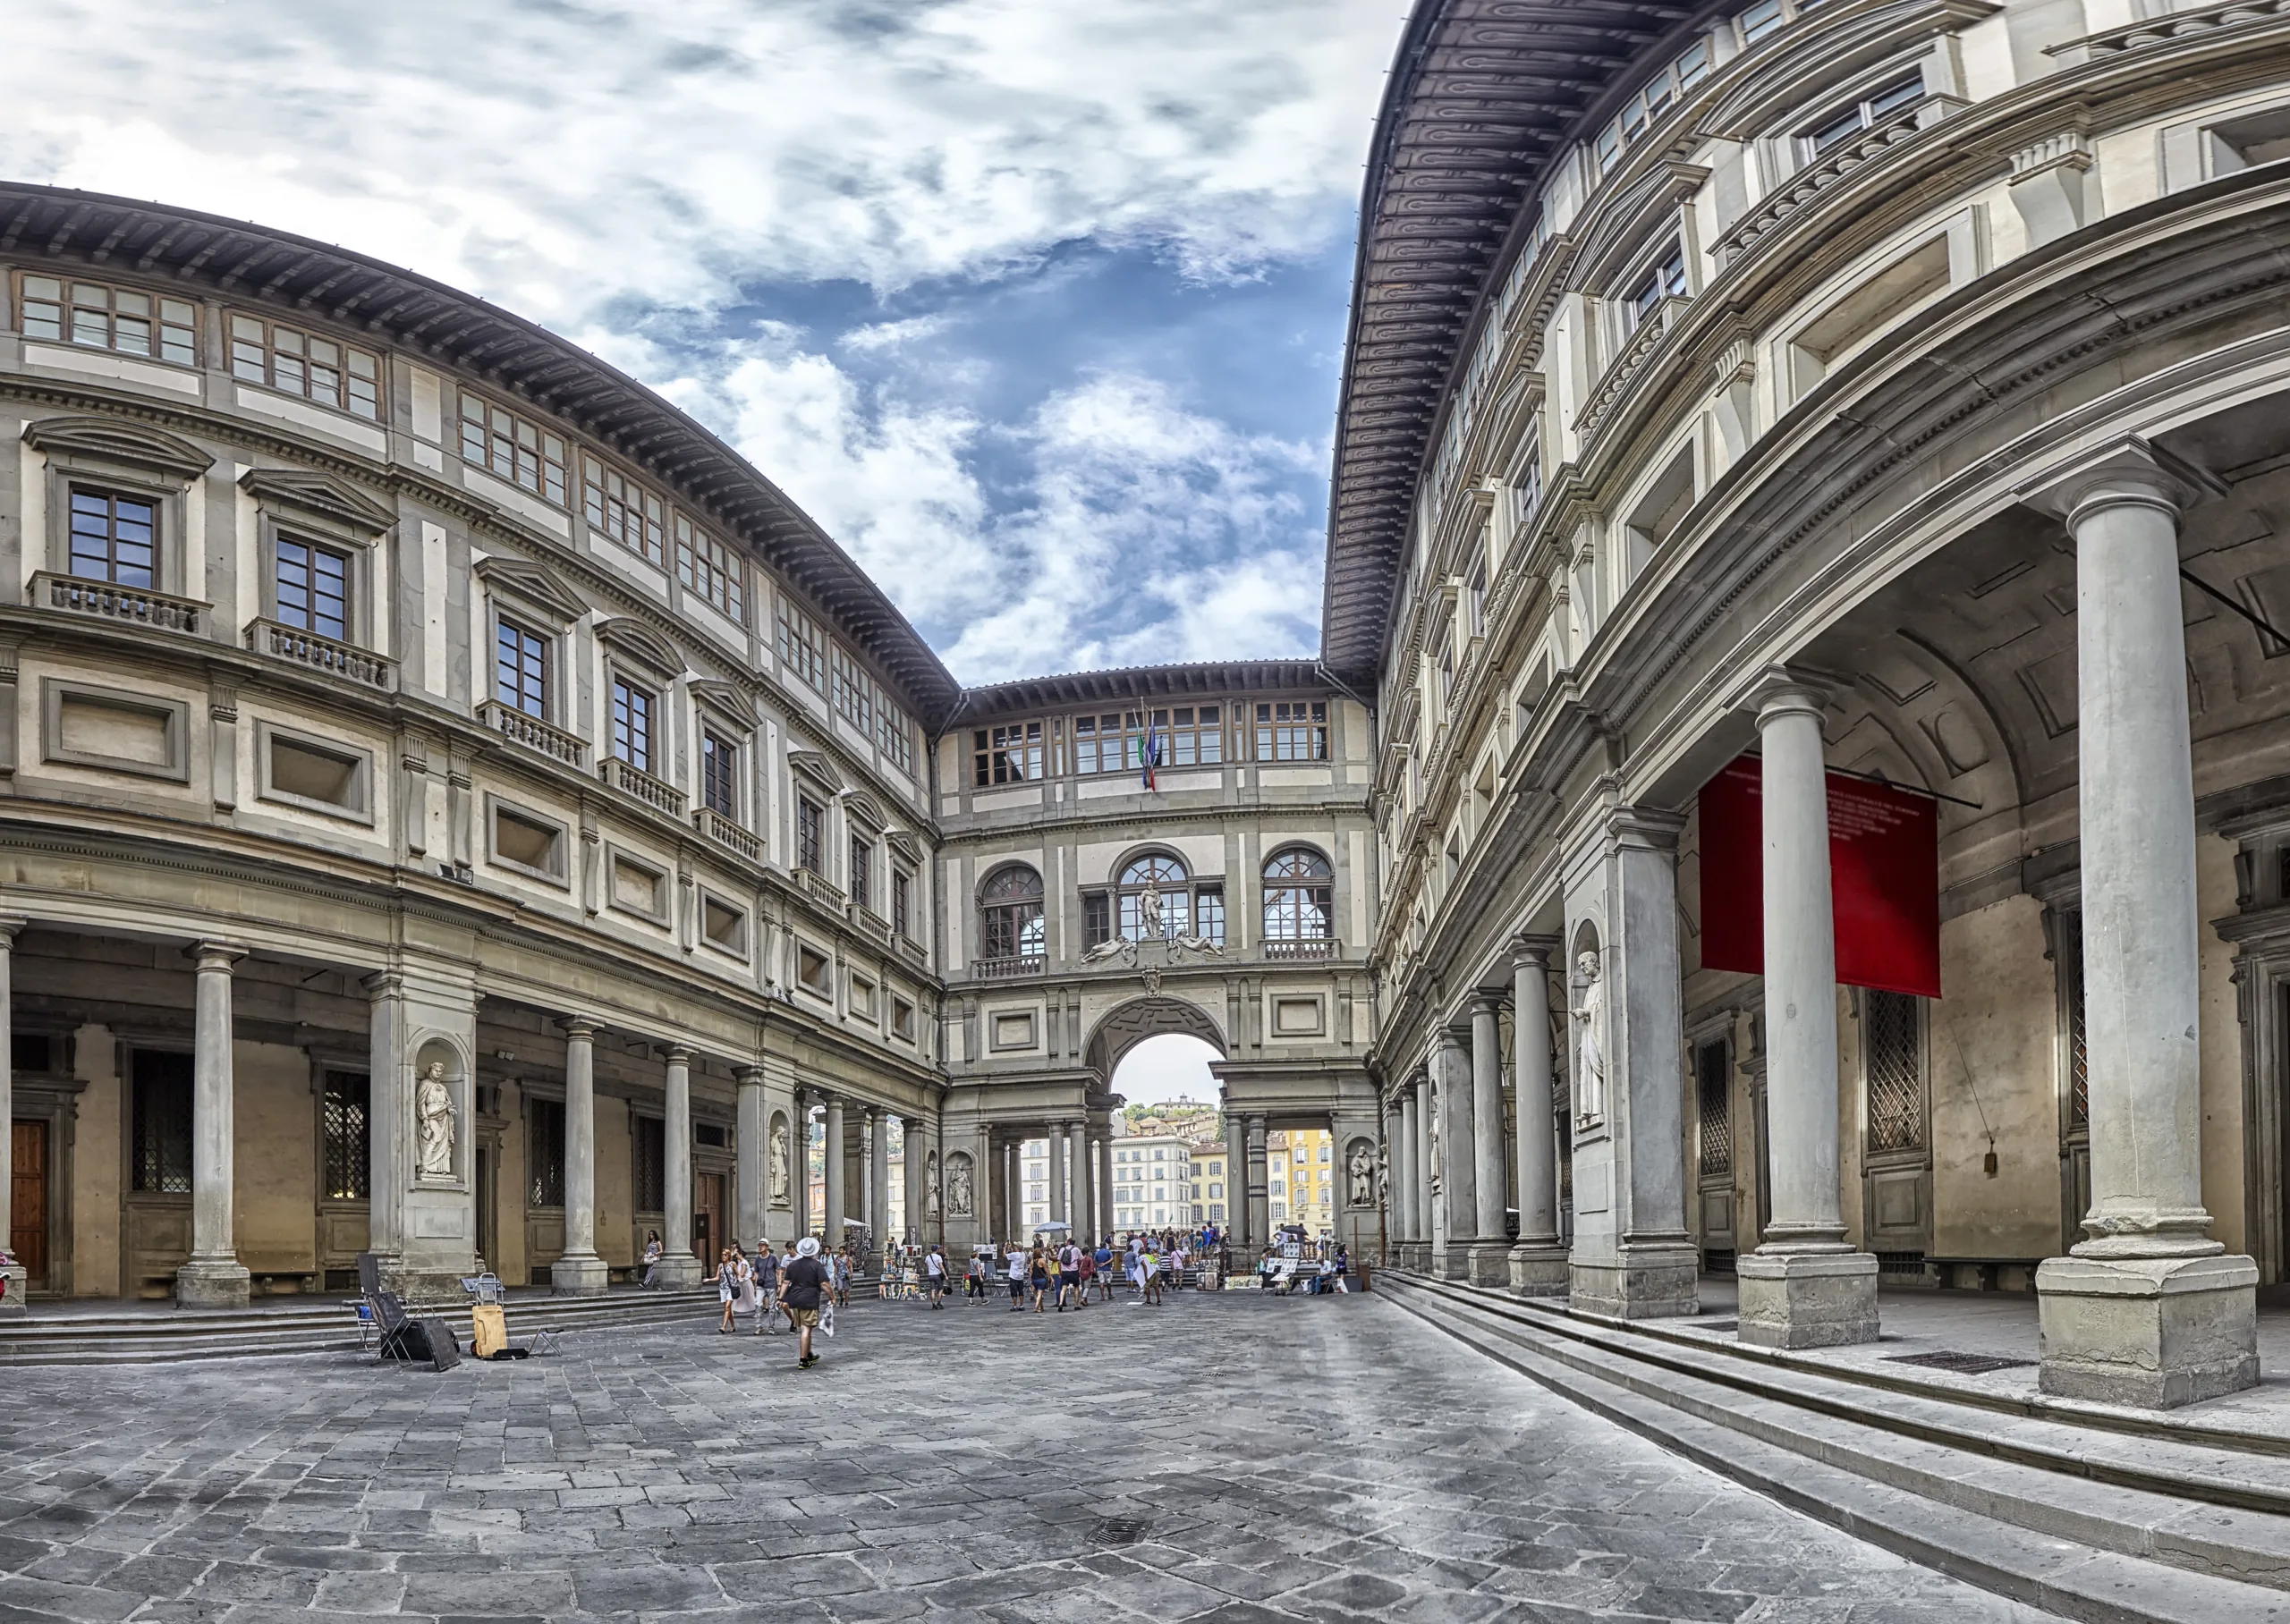 Exterior of the Uffizi Gallery